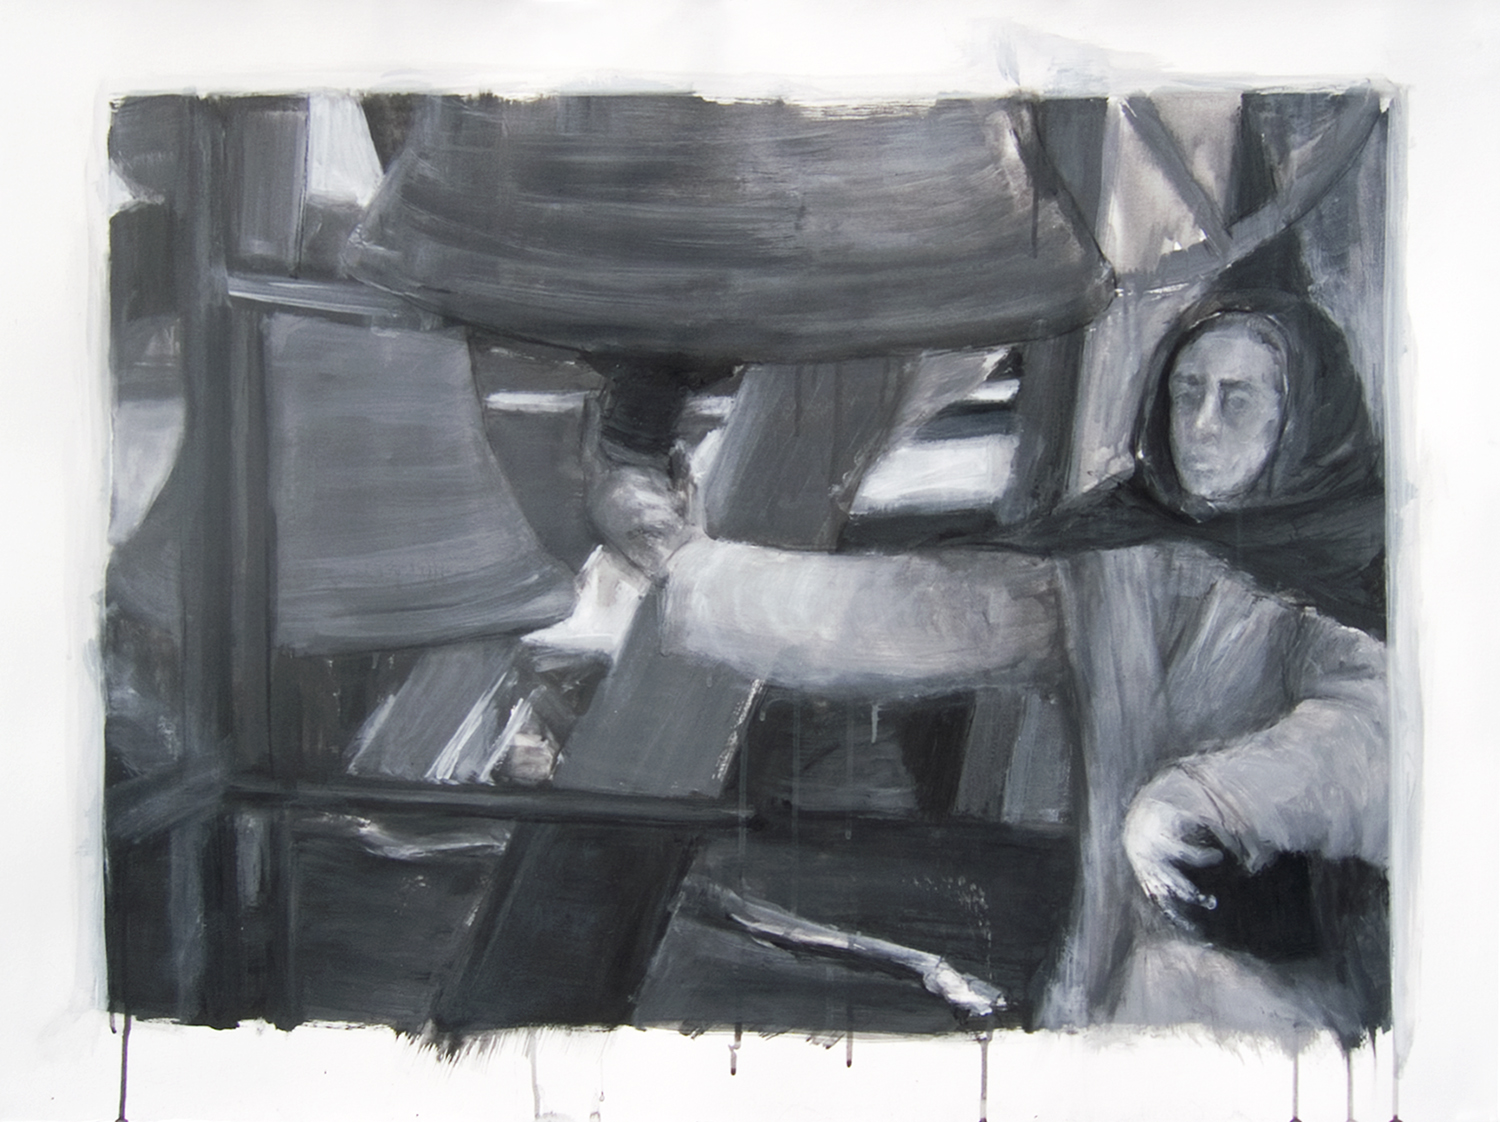    The bell ringer   , 2008,   acrylic on paper, 29 1/2 x 39 1/2 in.  